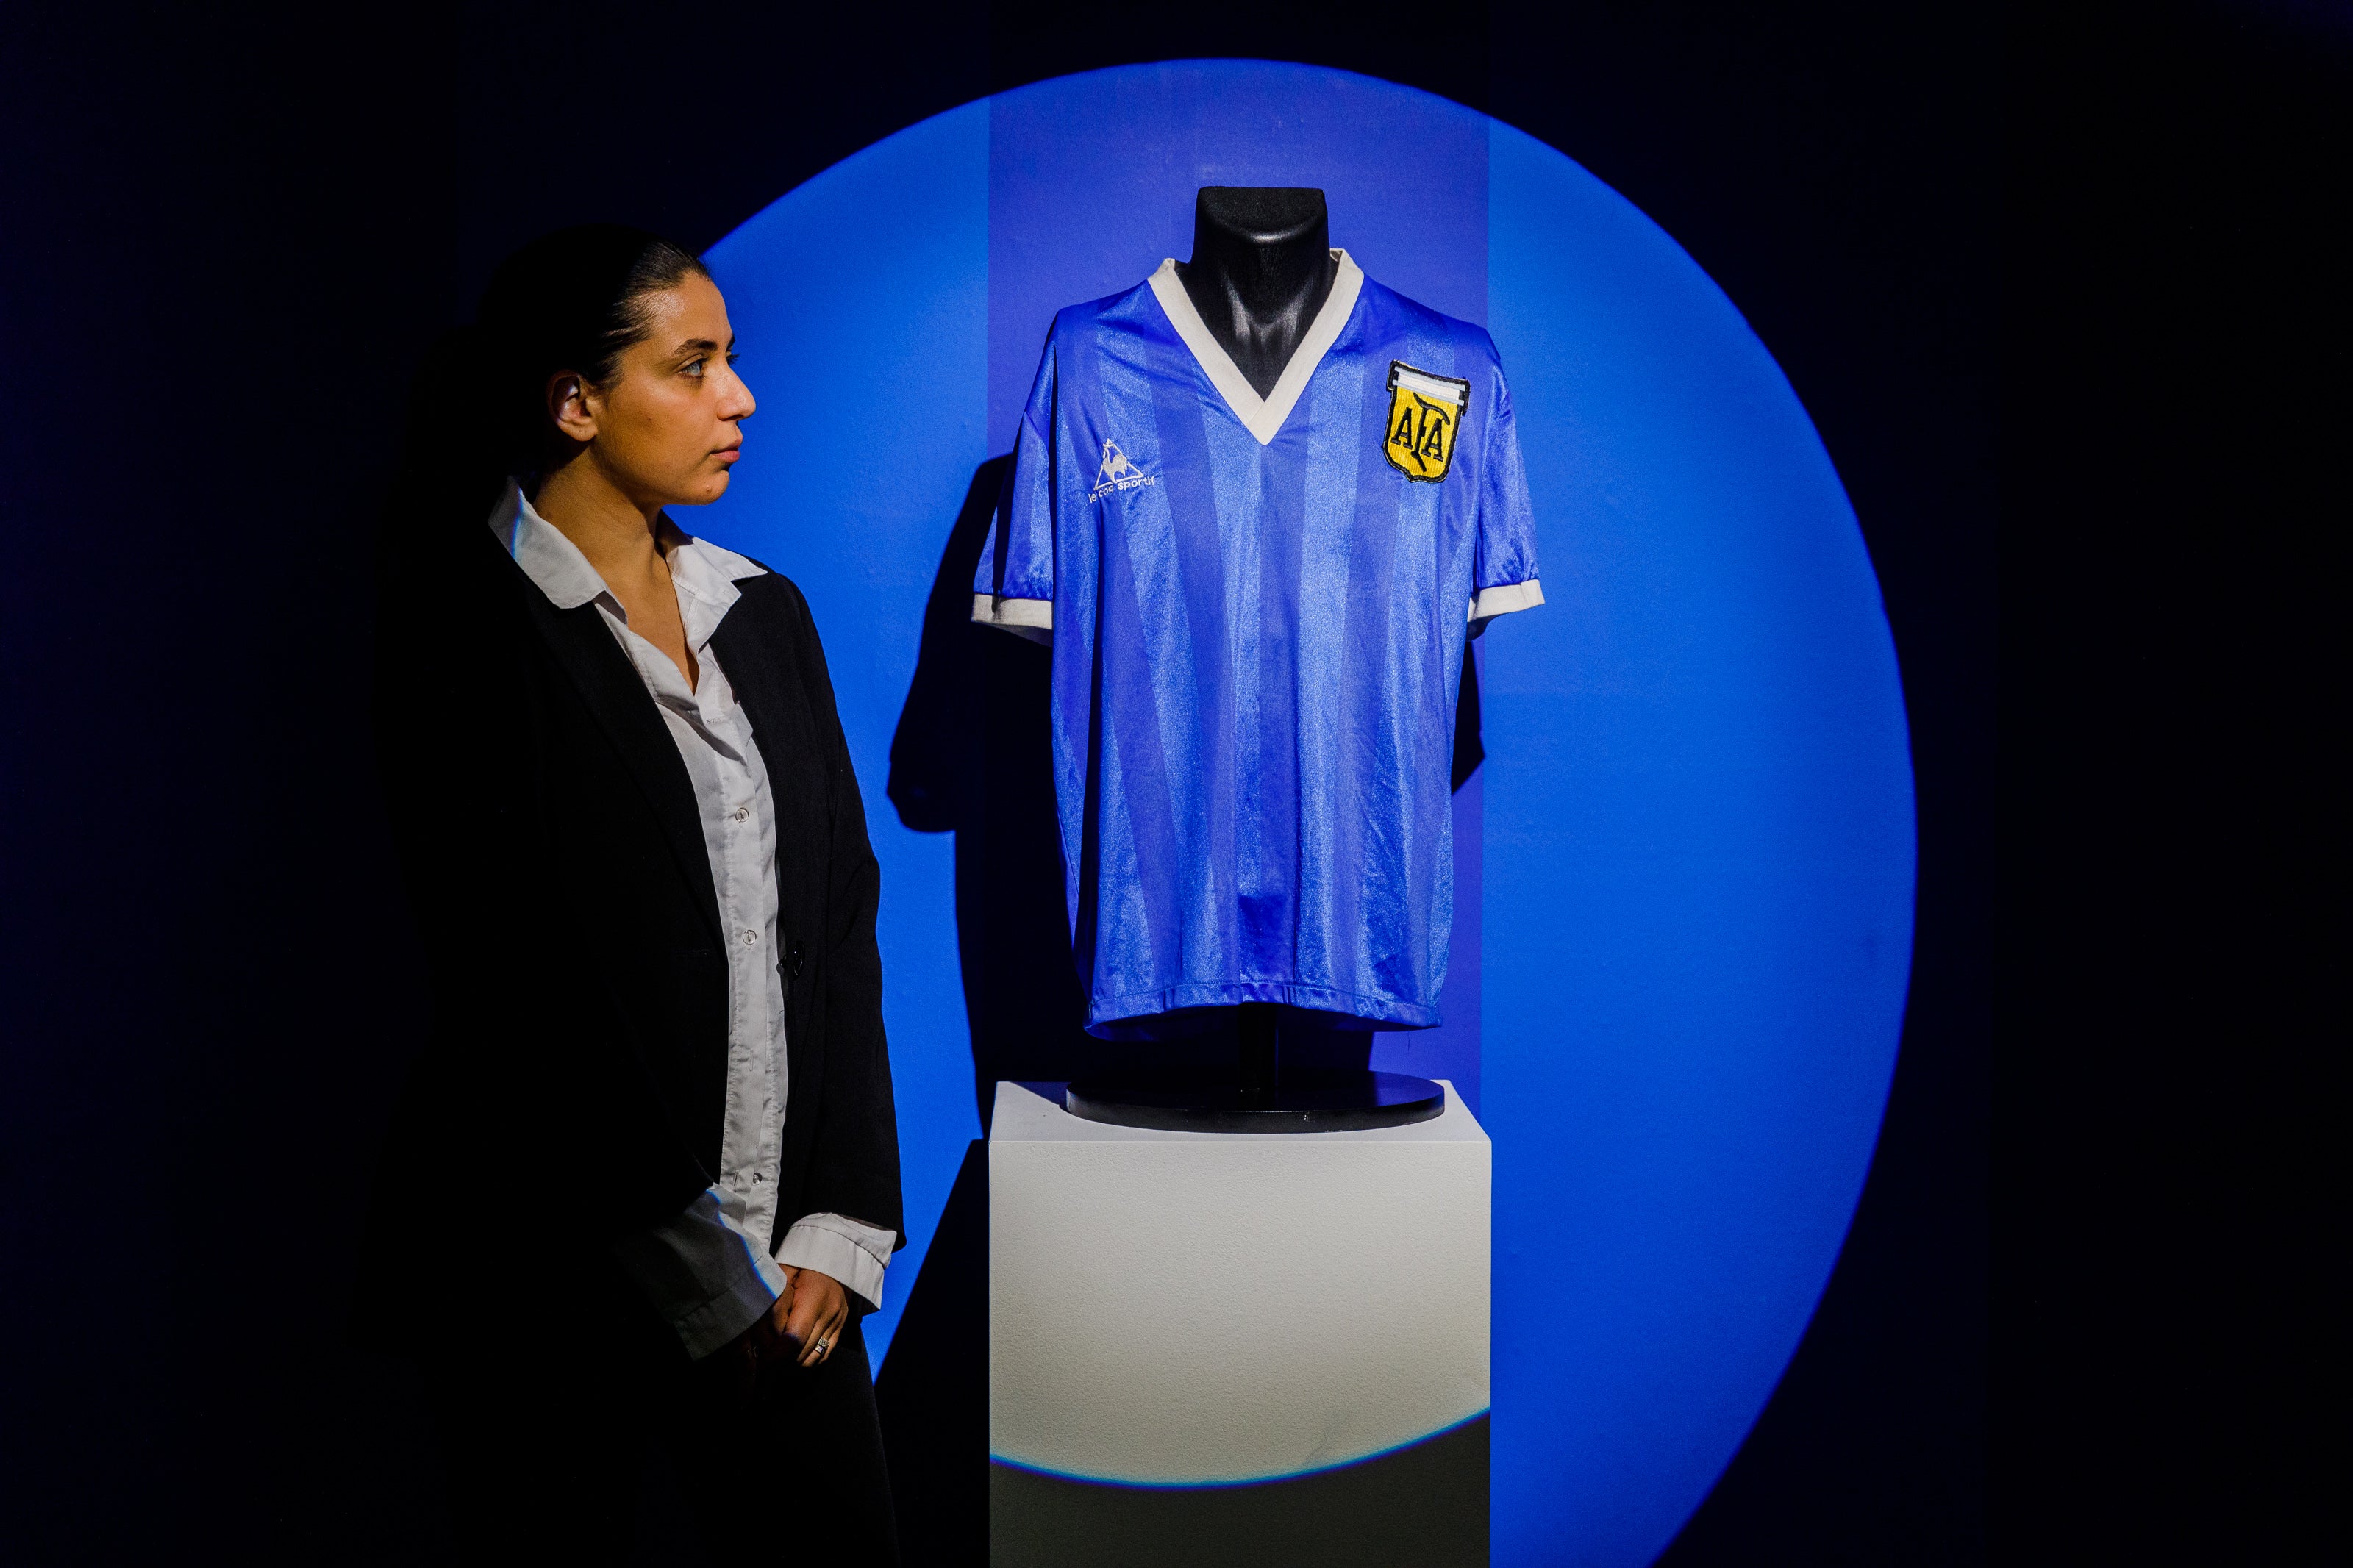 Diego Maradona’s iconic shirt is up for sale at Sotheby’s